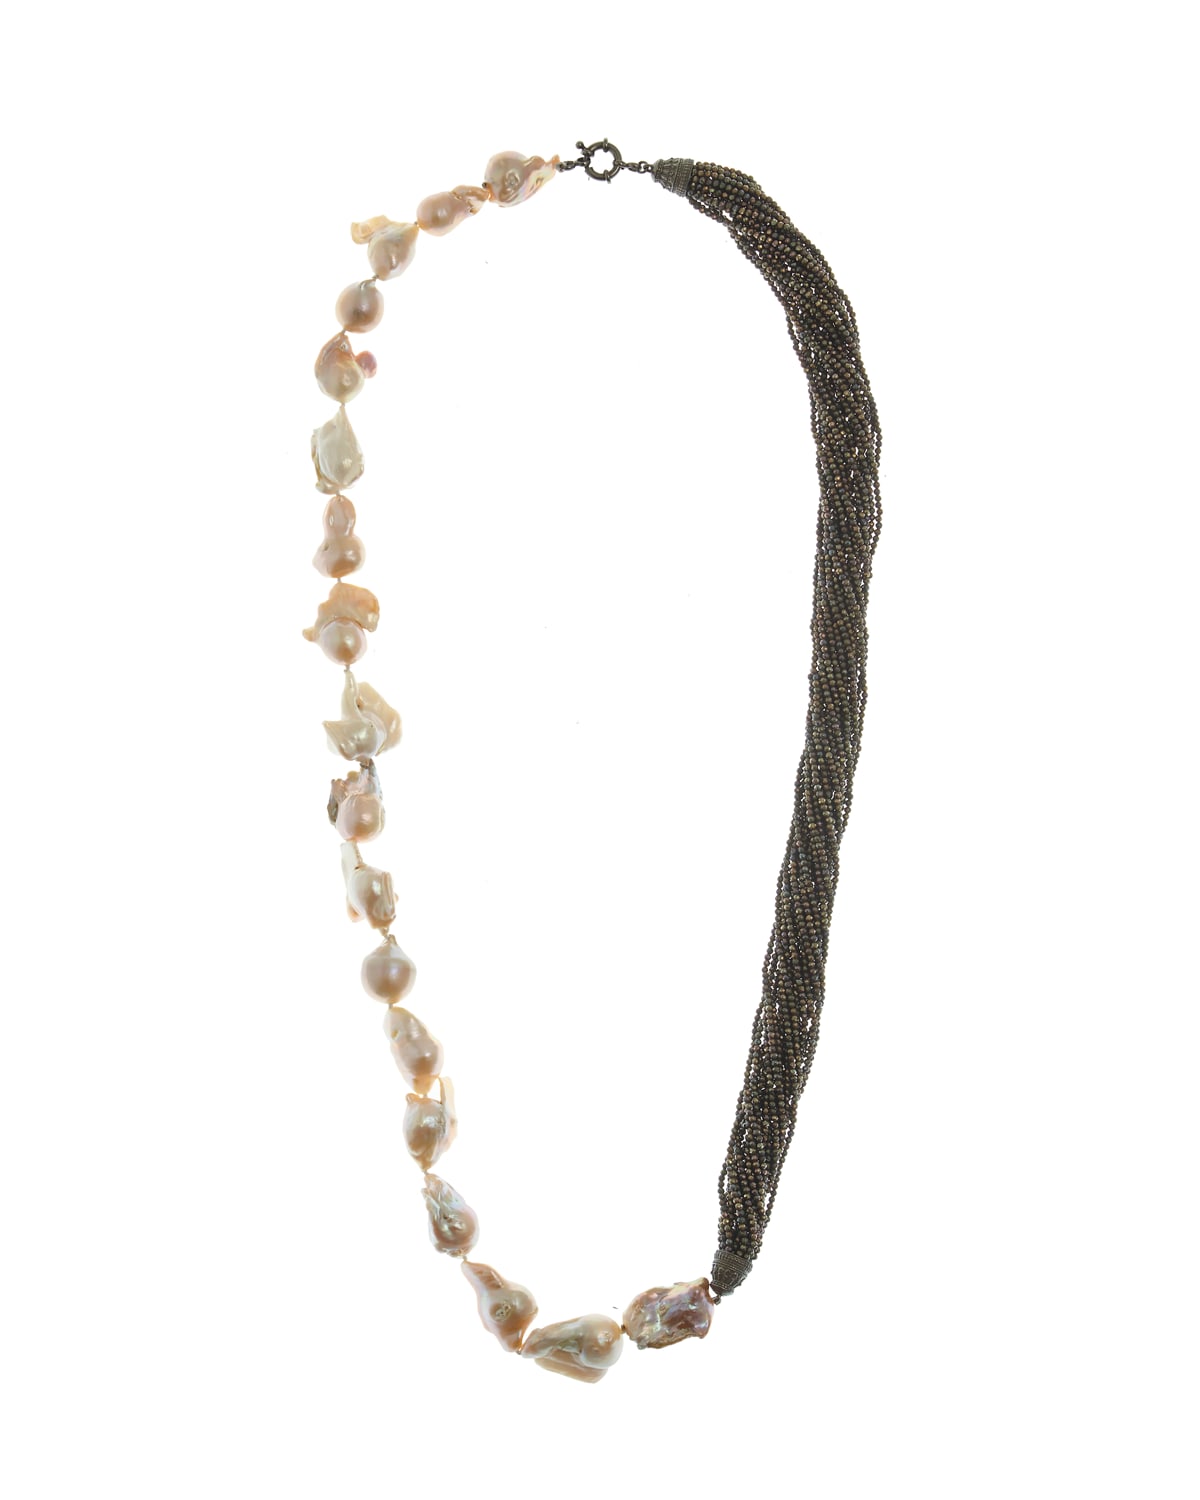 M.C.L. by Matthew Campbell Laurenza Half Baroque Pearl & Spinel Necklace